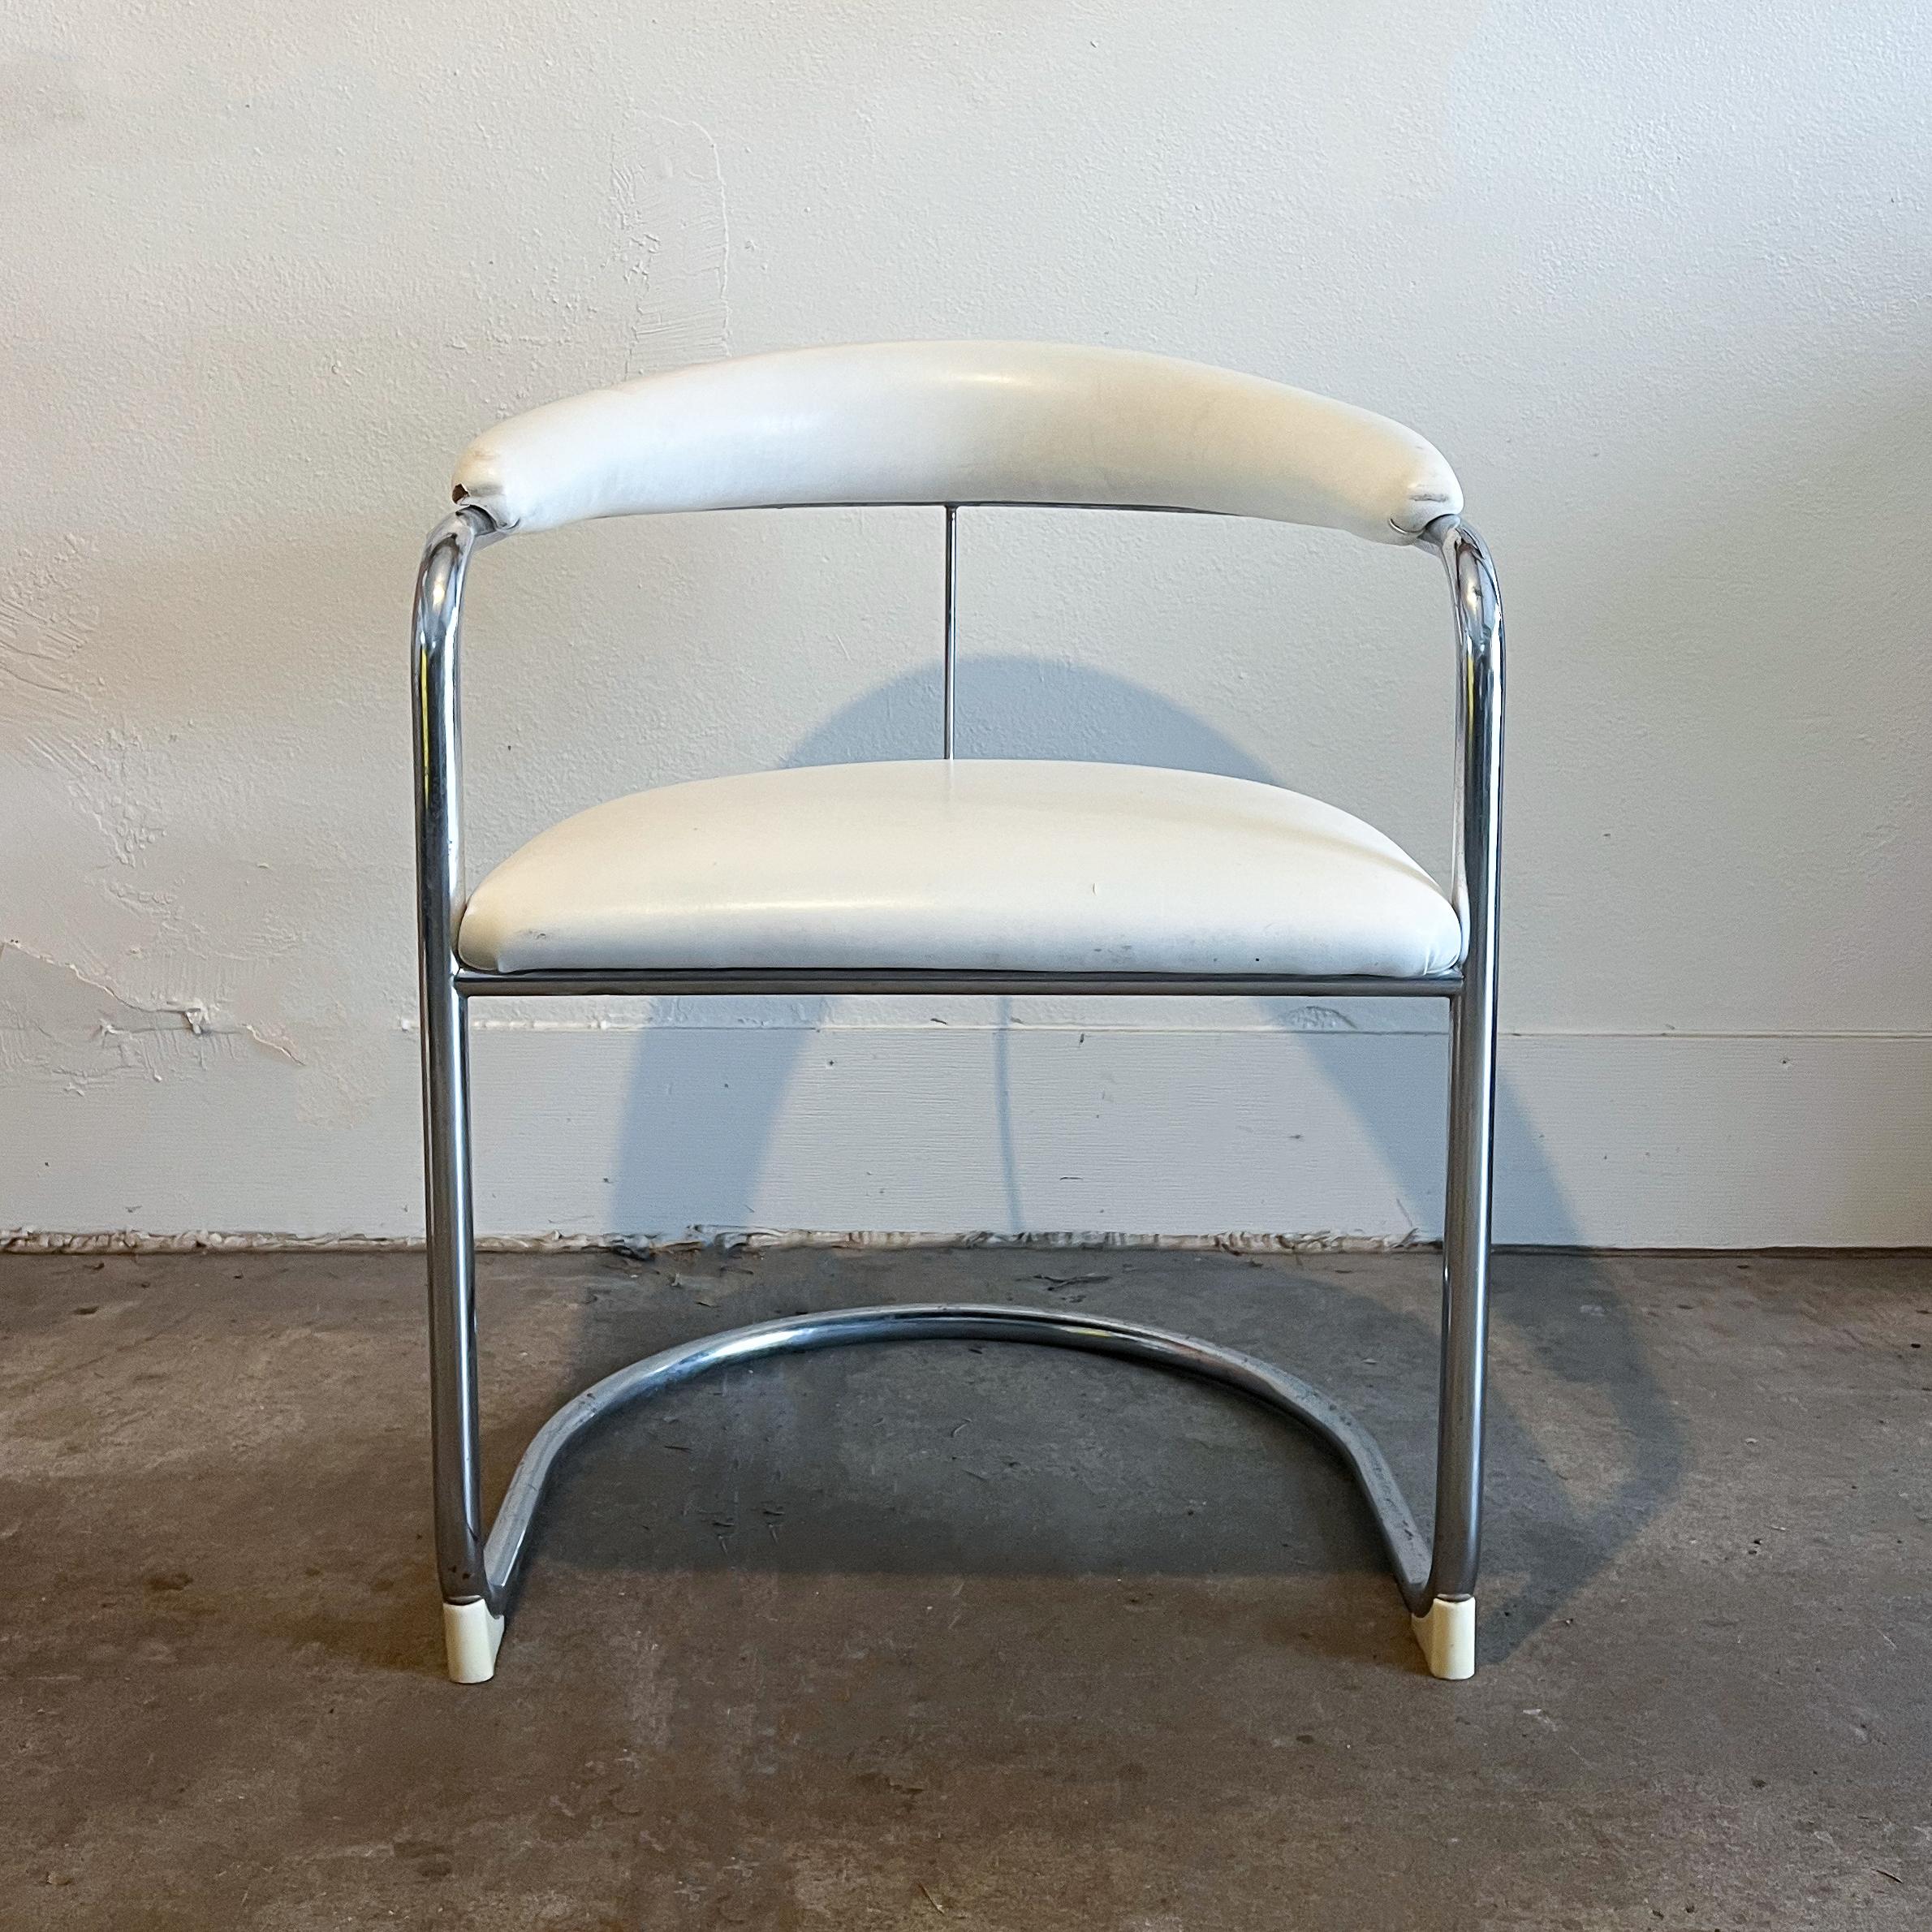 Step into the realm of vintage furniture with our white vinyl and chrome tube cantilever chair, reminiscent of the iconic Model SS33 Bauhaus chair designed by Anton Lorenz for Thonet. A true relic of the 1980s, this chair embodies the essence of the